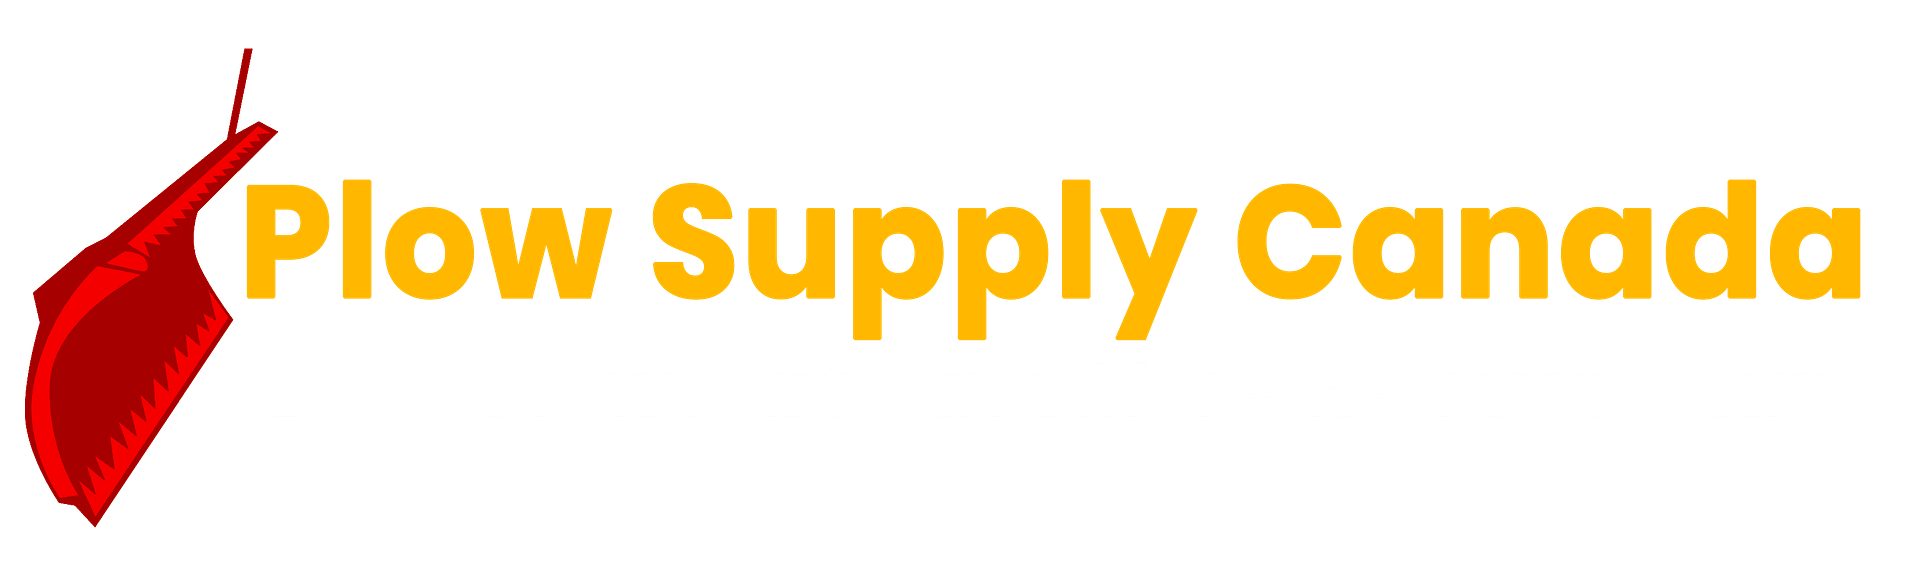 Plow Supply Canada -  Your Source for Plow Parts in Canada